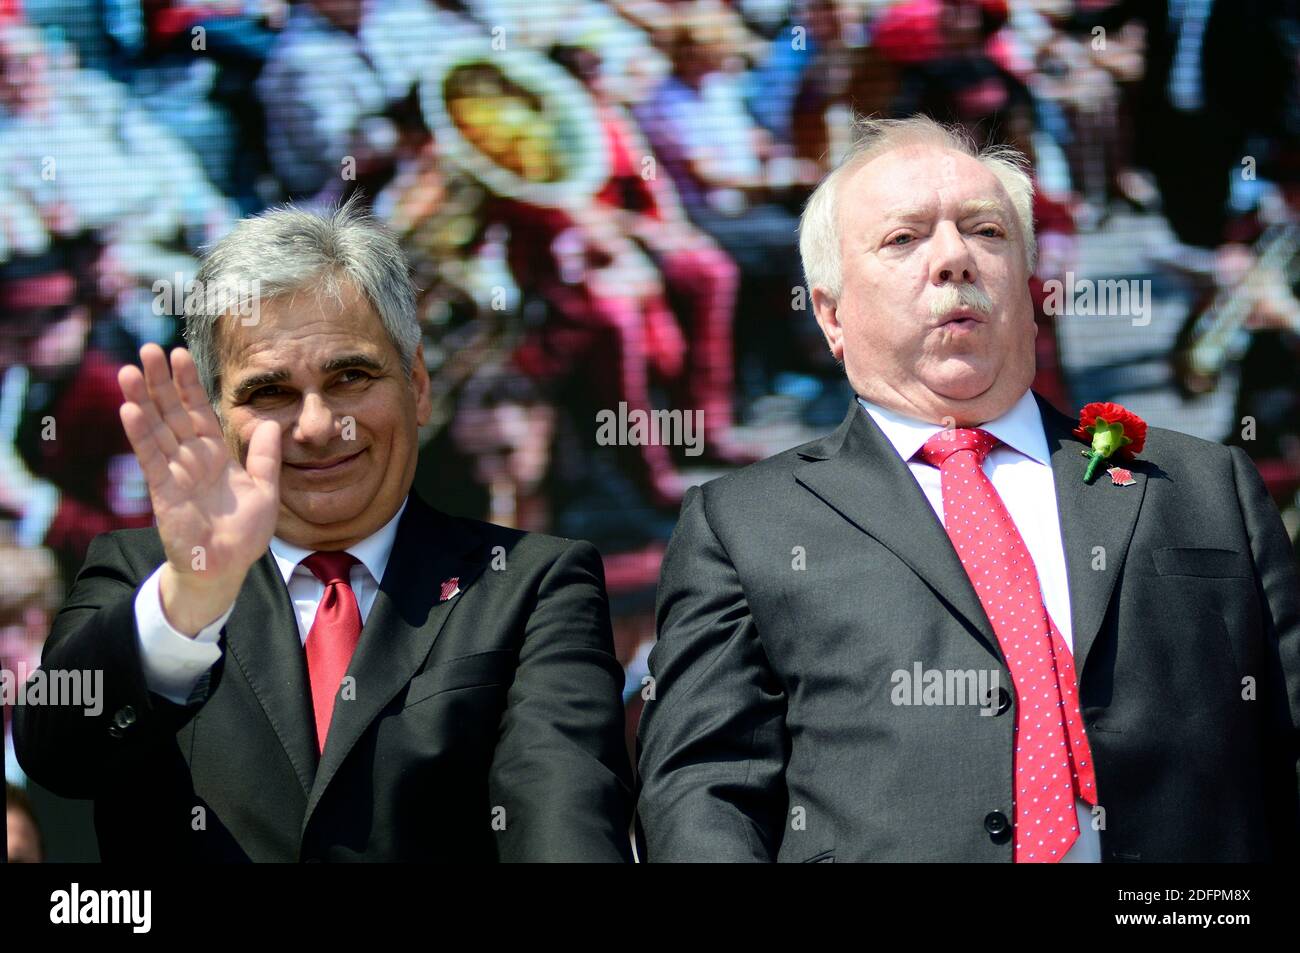 Austria Vienna. May 01, 2014. Michael Häupl is an Austrian politician (SPÖ- Social Democratic Party of Austria) and was Mayor and Governor of Vienna from November 7, 1994 to May 24, 2018. Picture shows Werner Faymmann (L) and Michael Häupl (R). Stock Photo